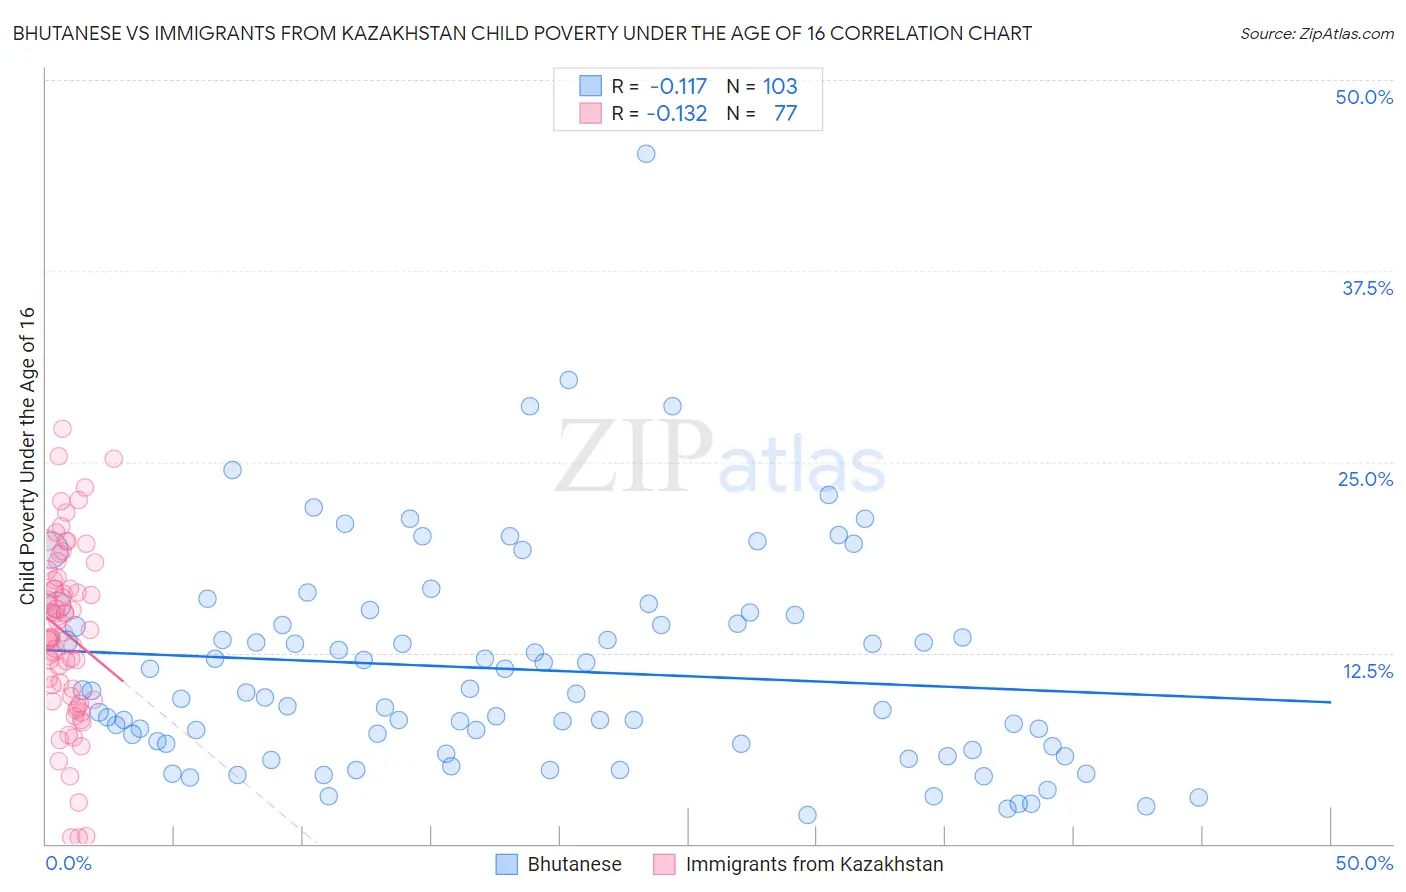 Bhutanese vs Immigrants from Kazakhstan Child Poverty Under the Age of 16